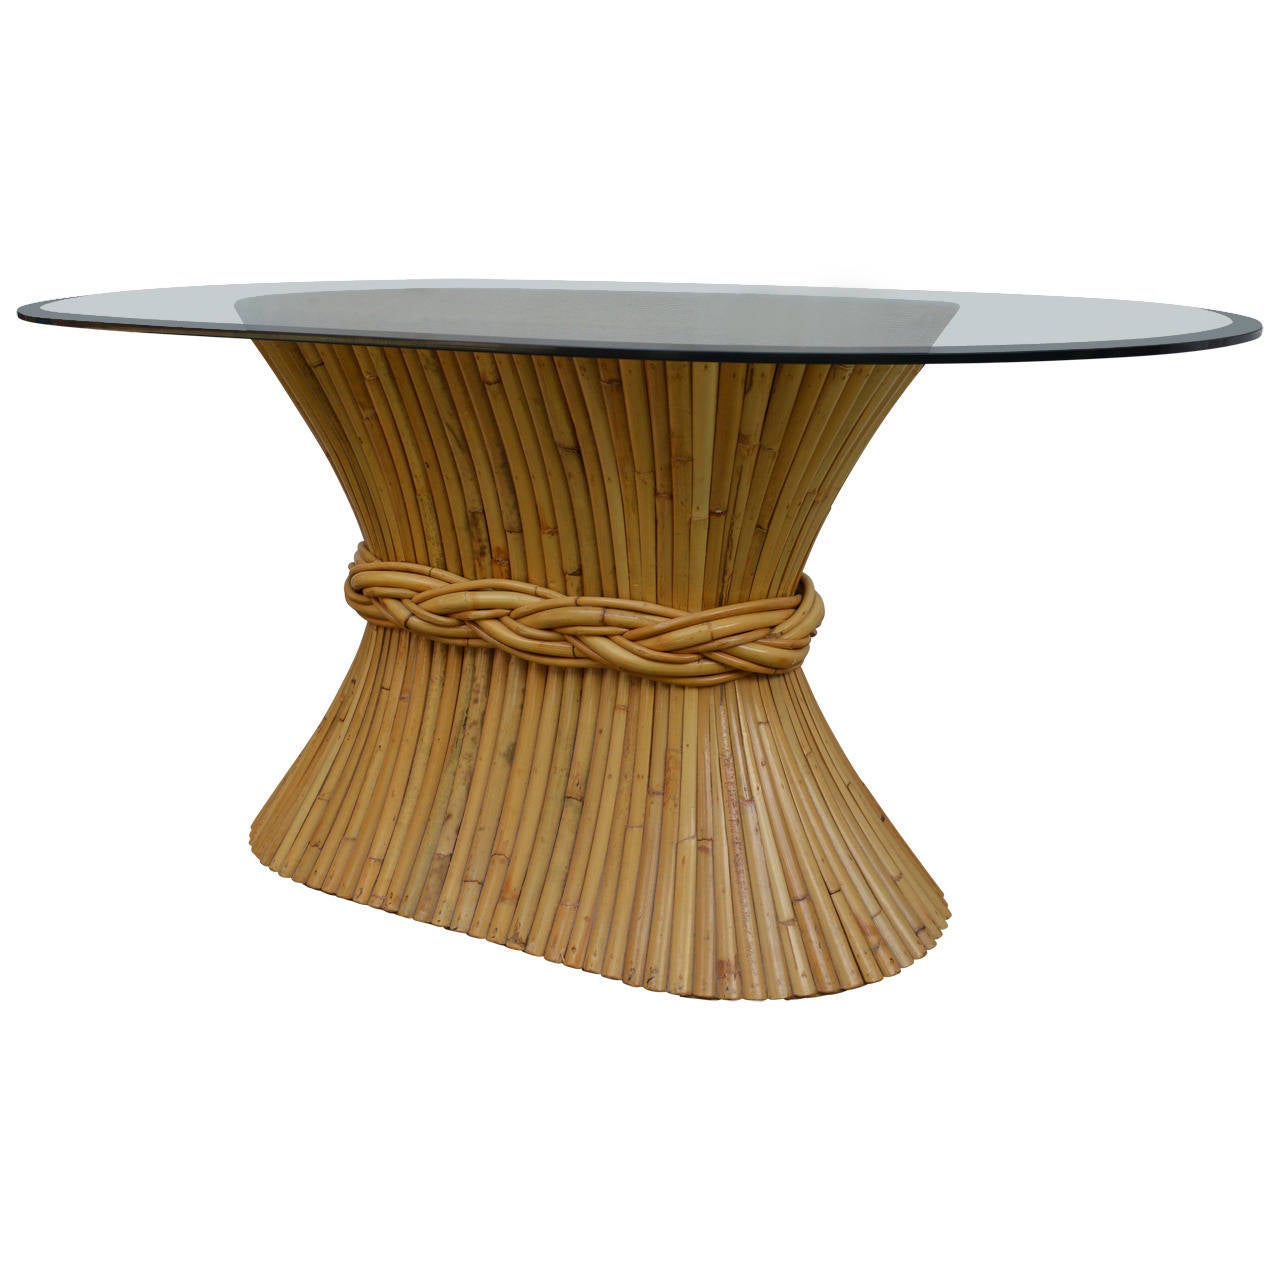 American Midcentury Sheaf of Wheat Dining Table by McGuire